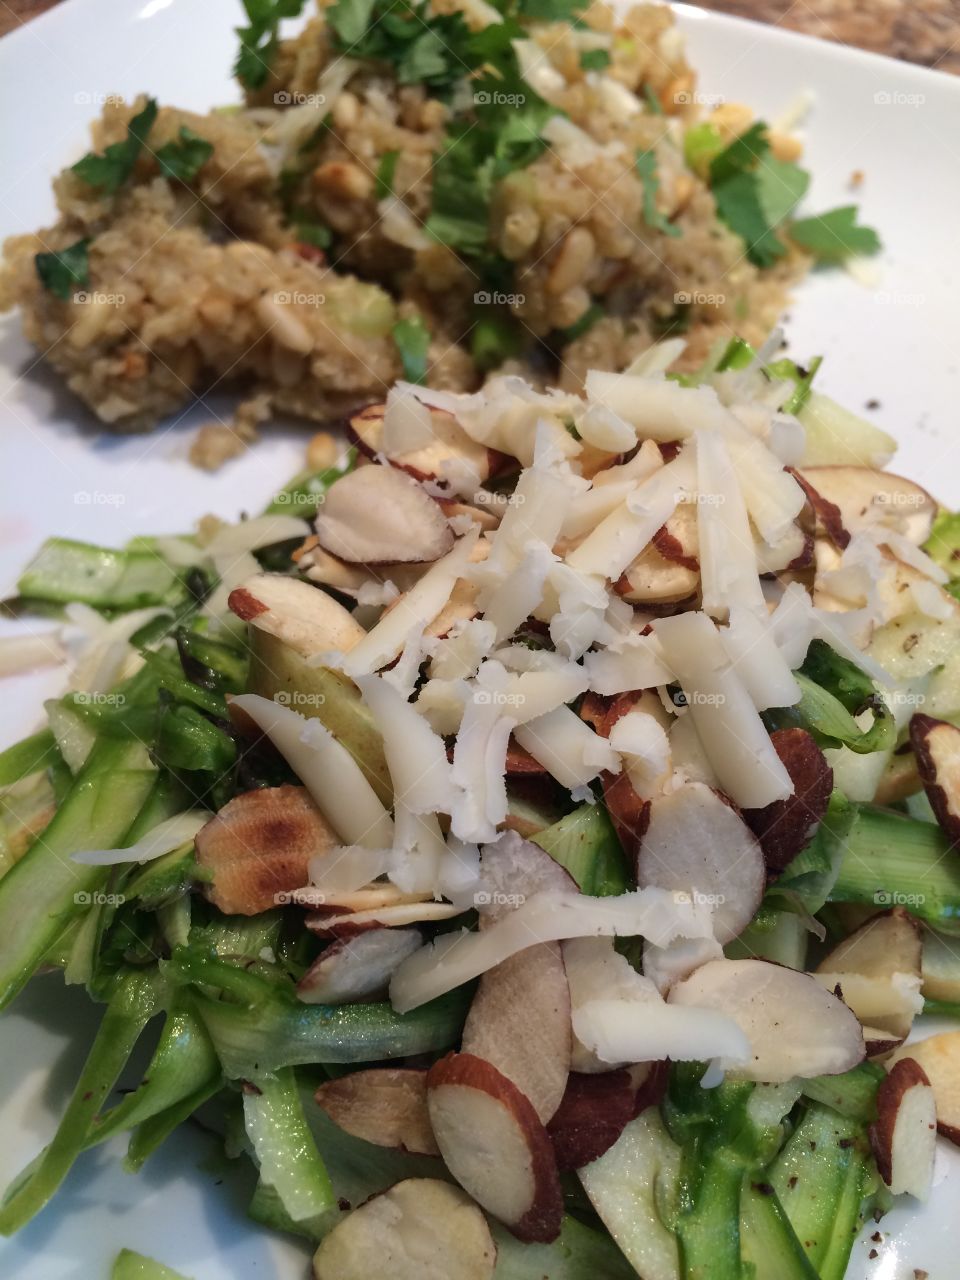 Healthy eating . Healthy meal - quinoa, shaved asparagus salad, almonds